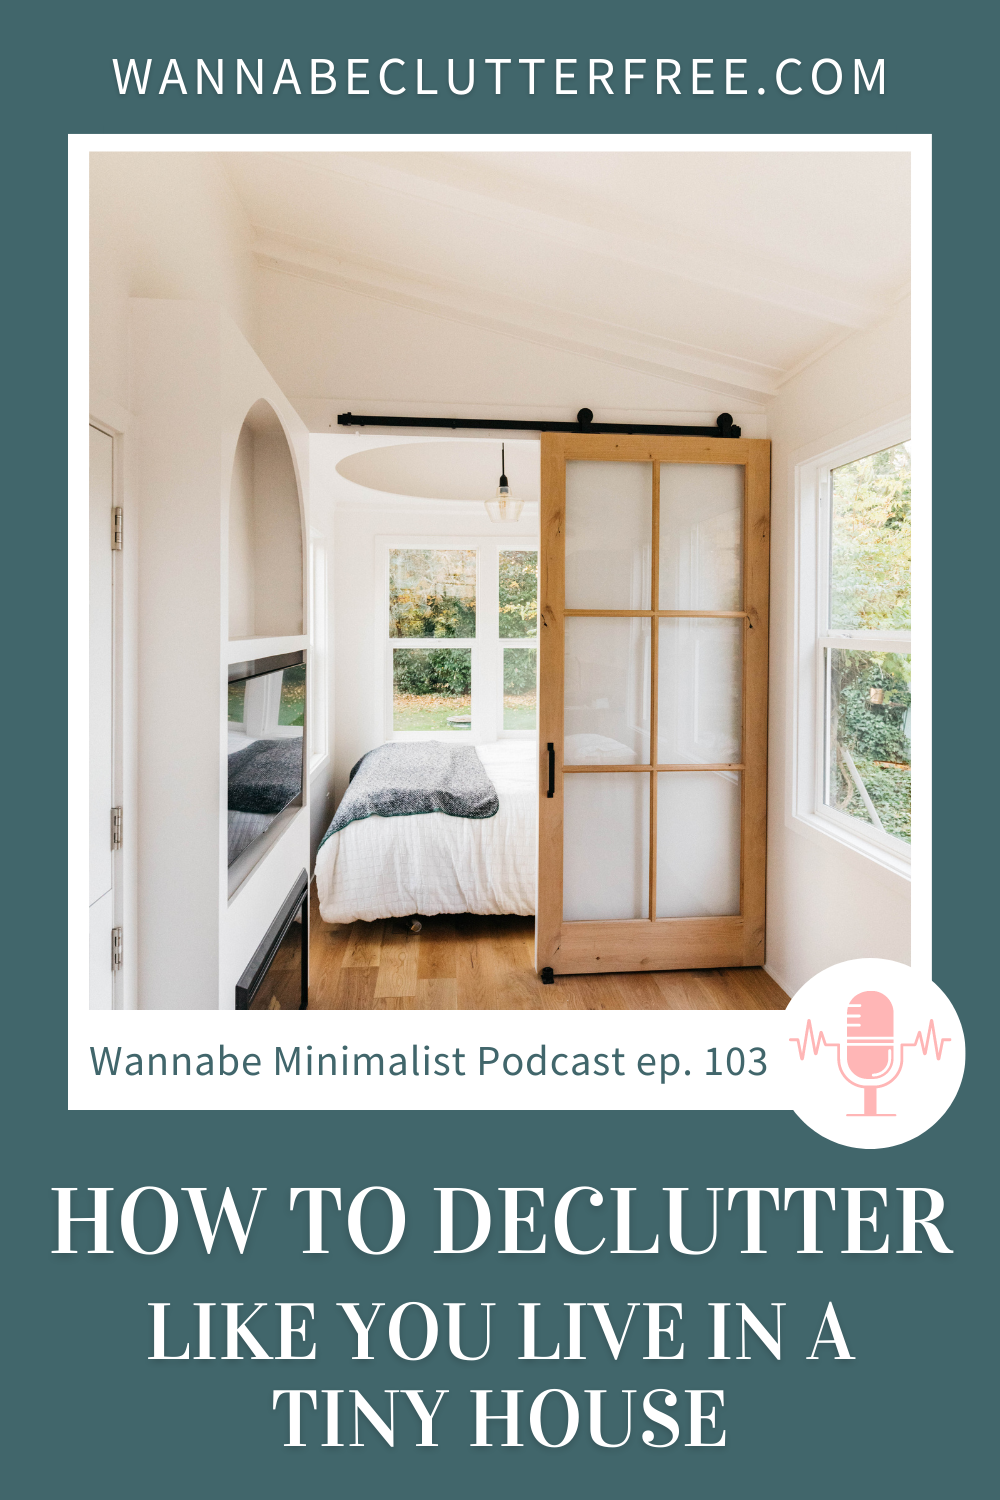 How to declutter like you live in a tiny house